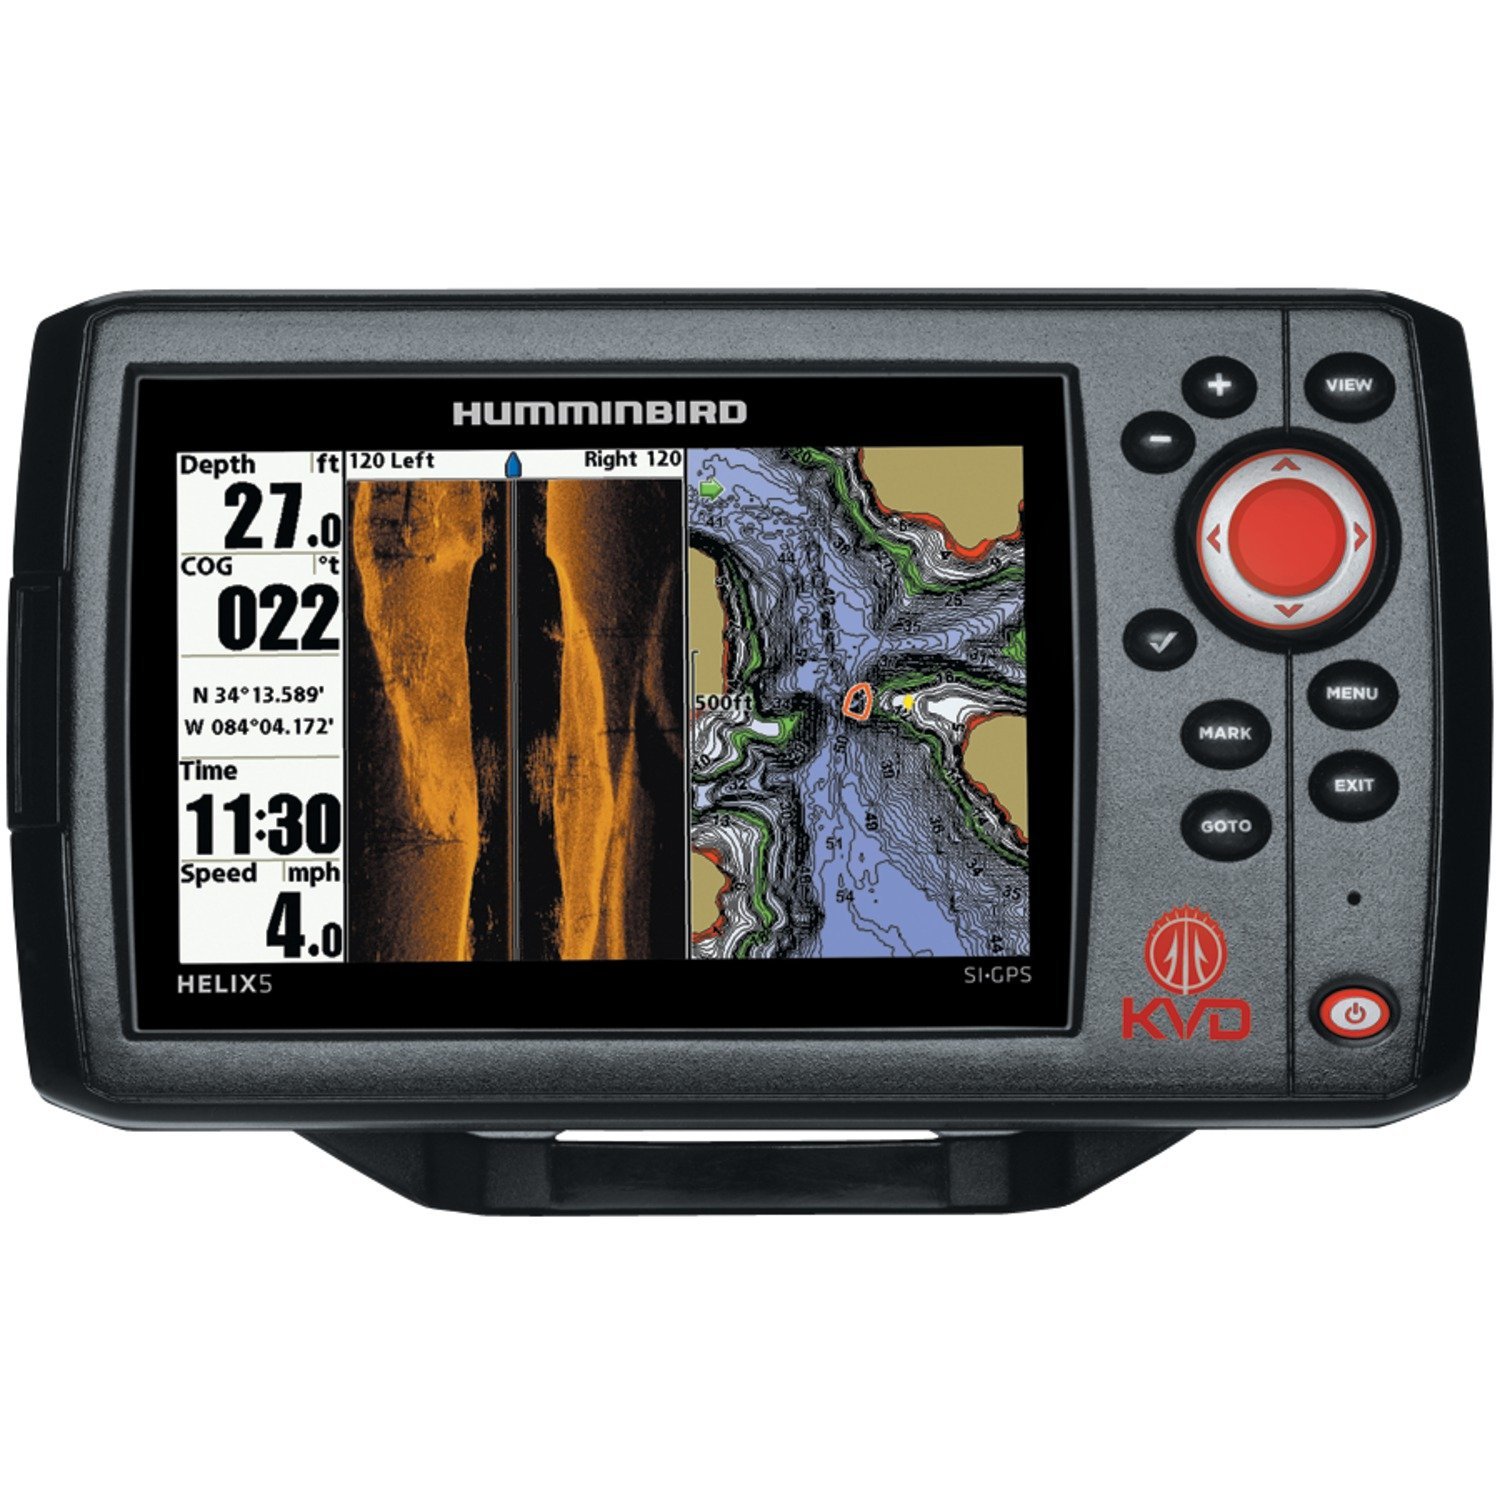 Humminbird 409640-1 HELIX 5 SI Fish Finder with Side Imaging and GPS